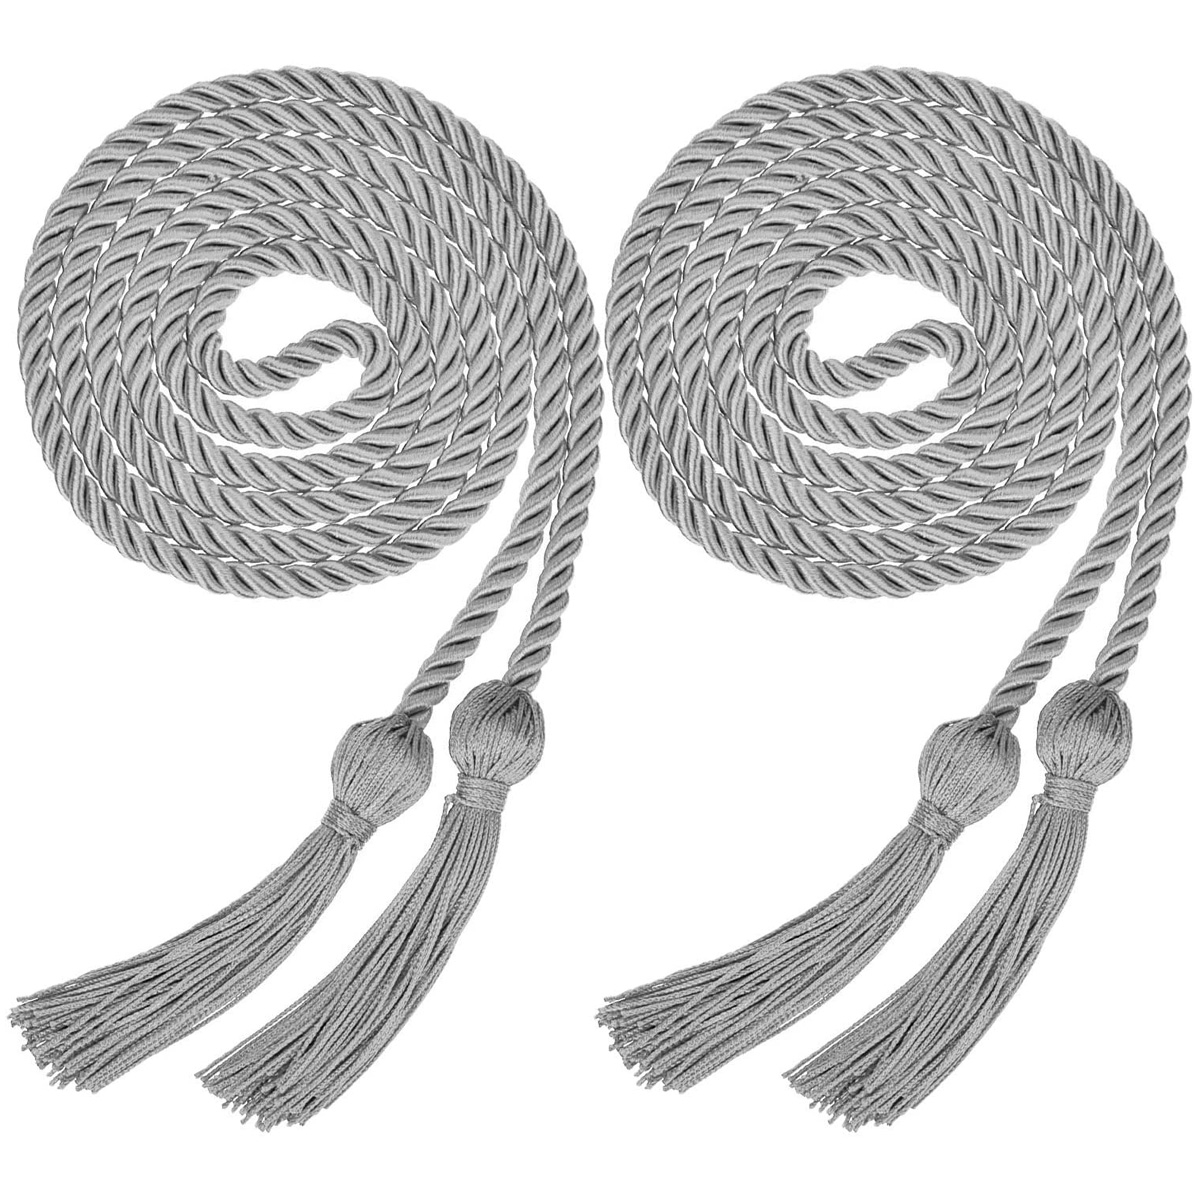 2 Pieces Graduation Cords Polyester Yarn Honor Cord with Tassel for Graduation Students (Silver)